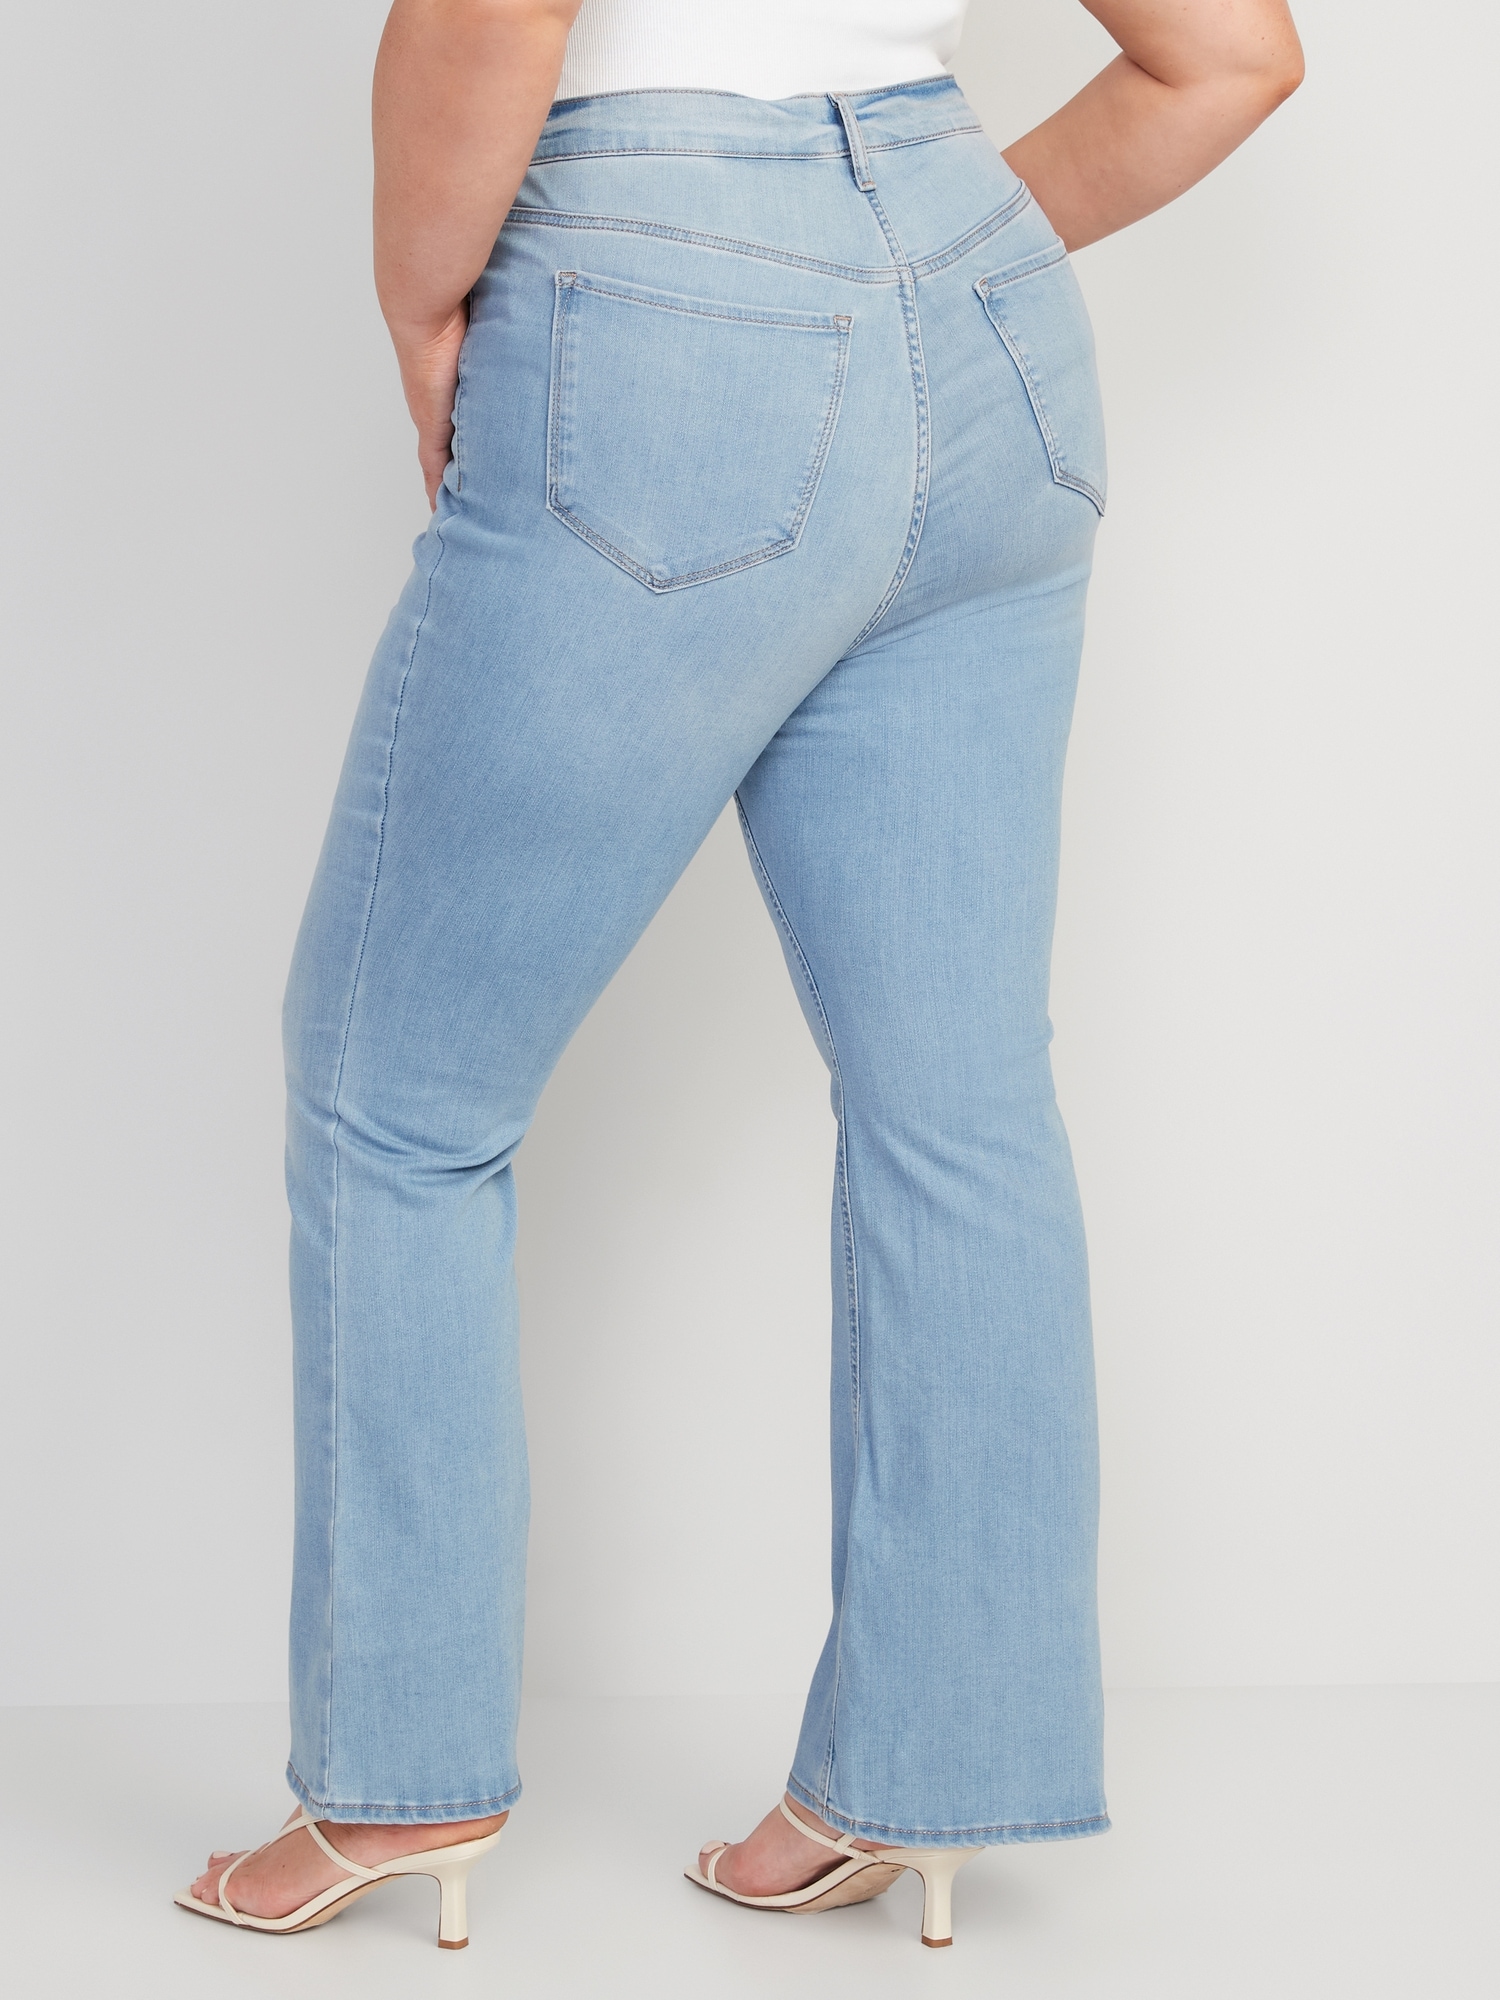 FitsYou 3-Sizes-In-One Extra High-Waisted | Jeans for Navy Old Flare Women